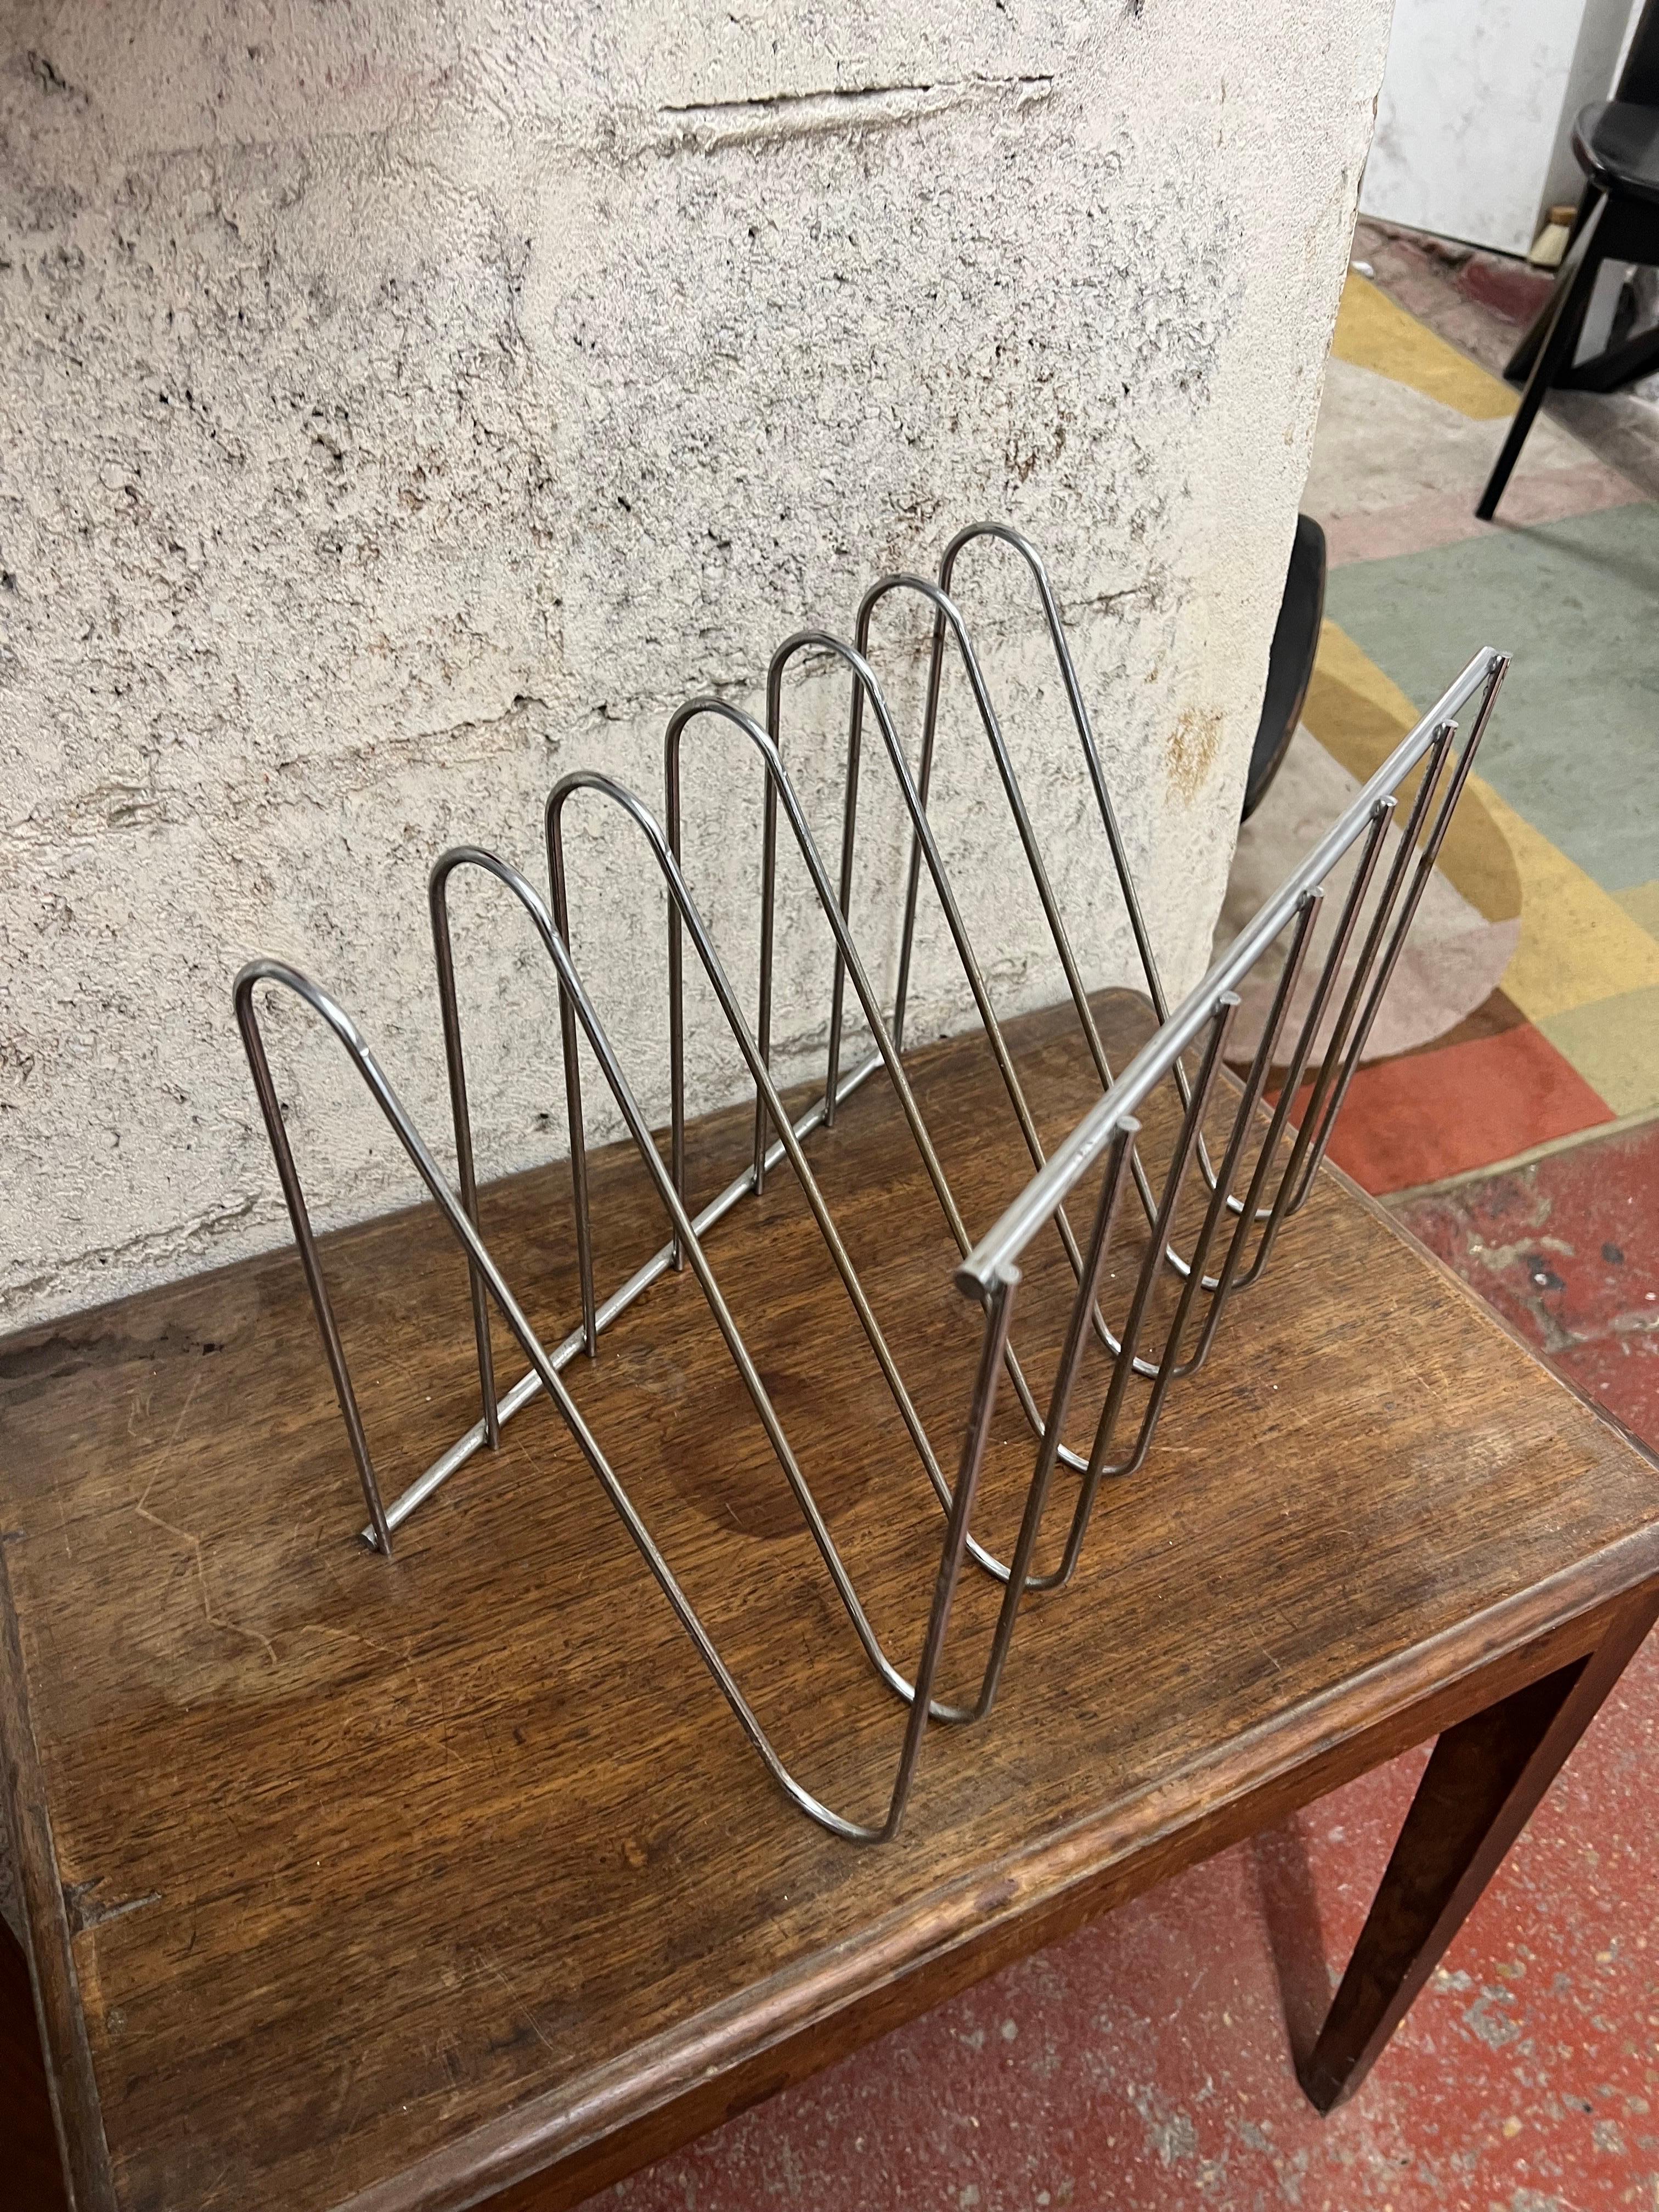 magazine rack by Francois arnal for atelierA in Crome steel thread showing a Z succession.